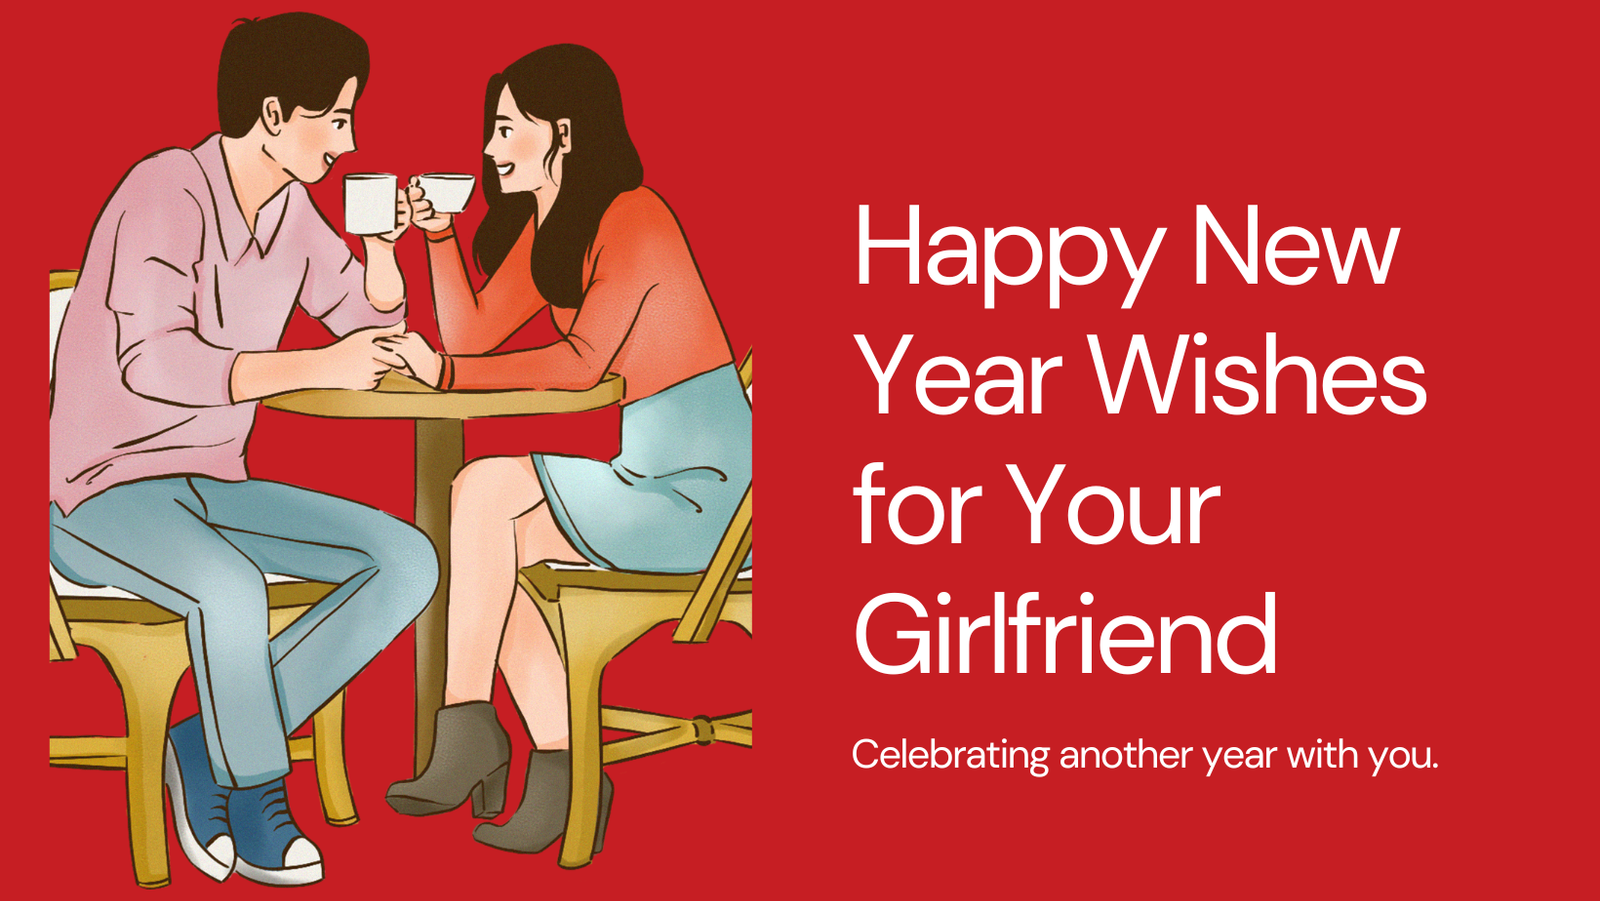 Happy New Year Wishes for Your Girlfriend